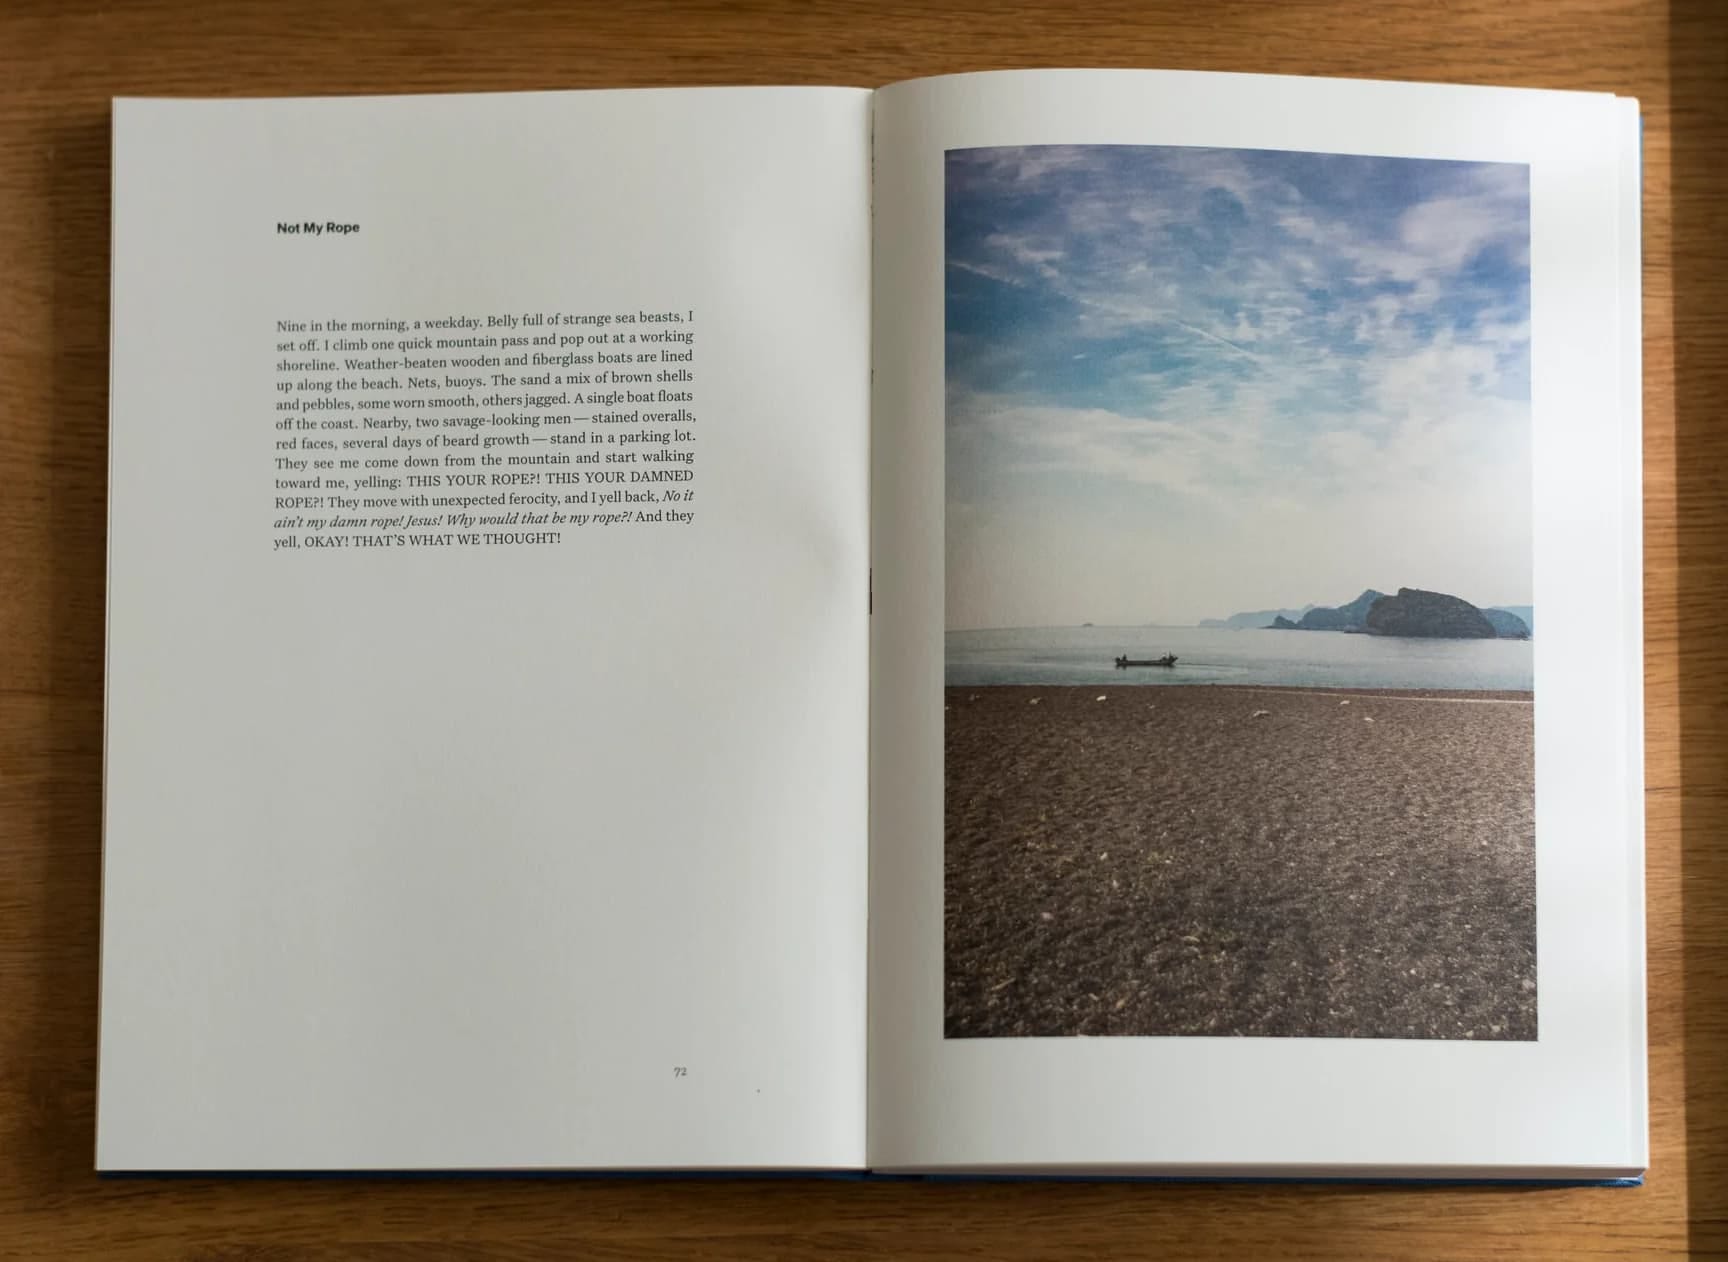 Photograph of an open book on a wood table; there is text on the left-hand page and a landscape photograph on the right-hand page